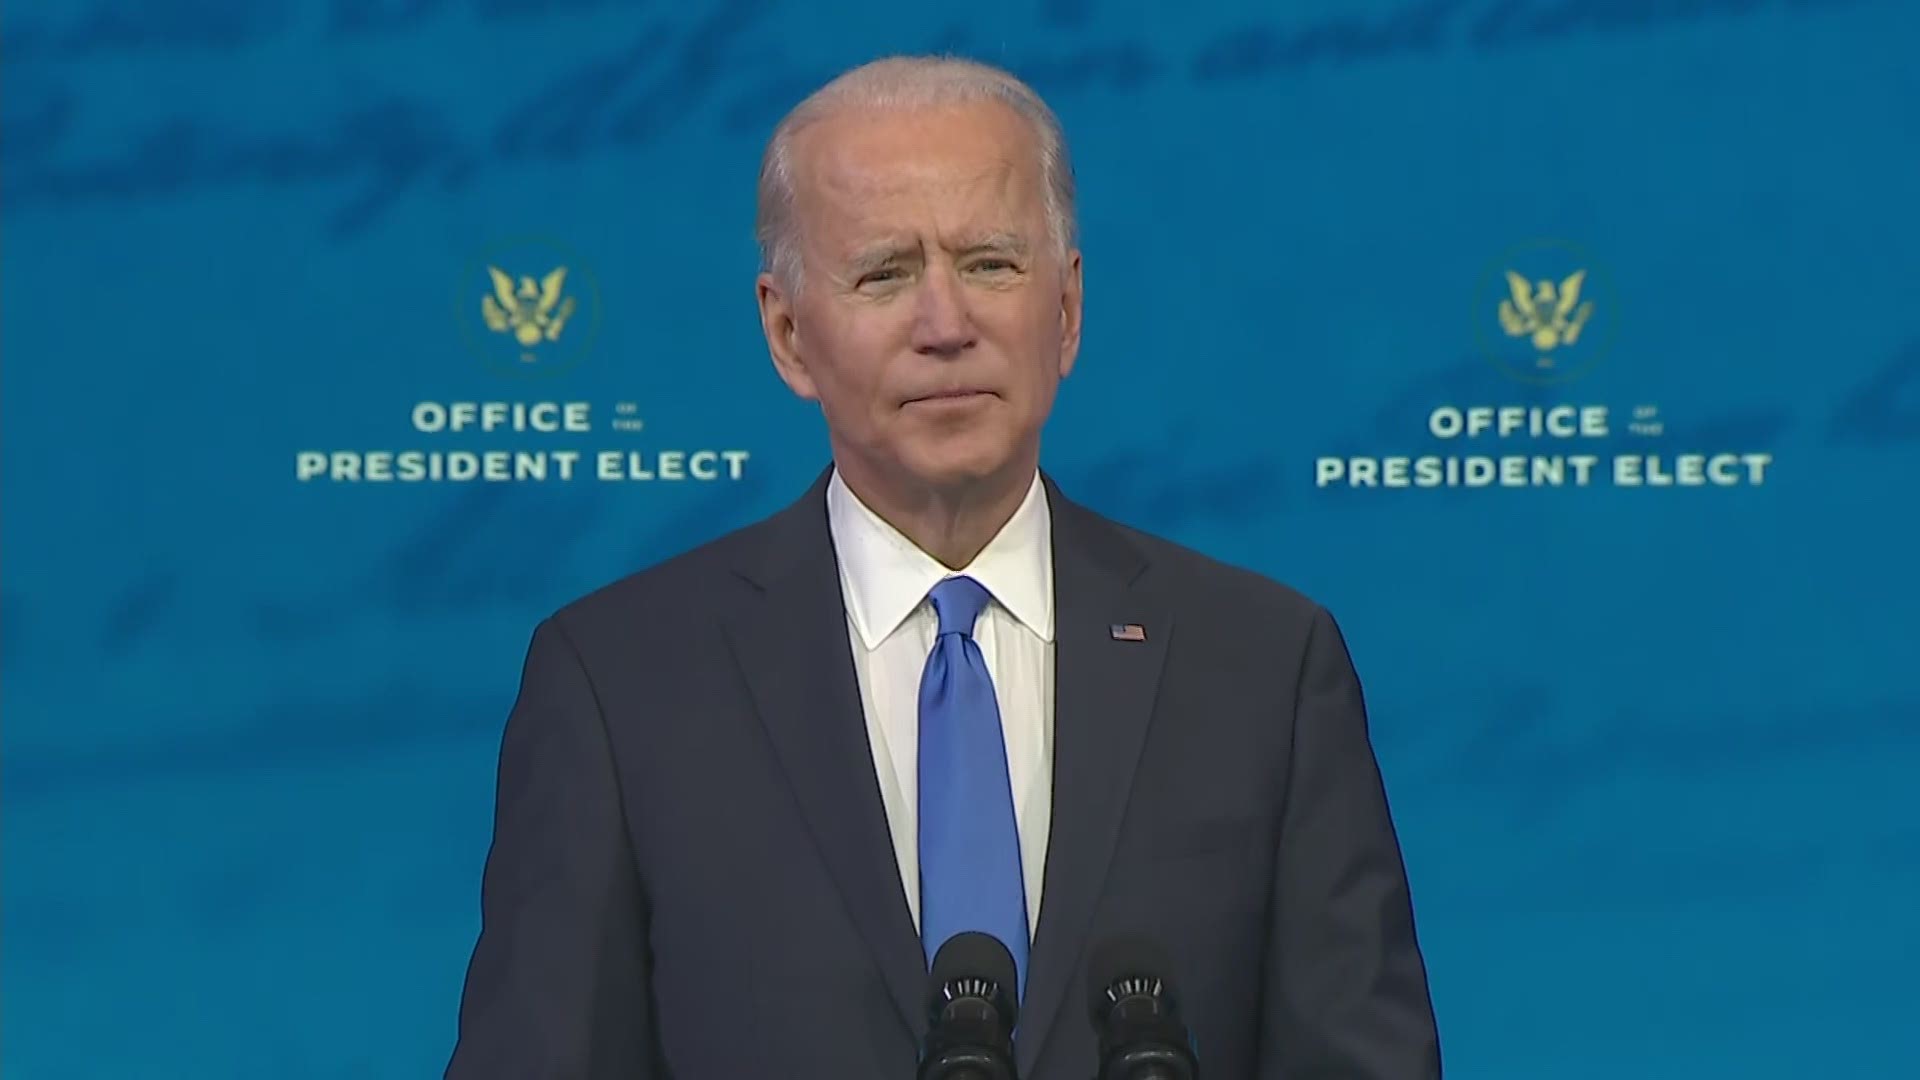 President-elect Joe Biden addressed the nation after formally receiving the 270 electoral votes needed to win the 2020 presidential election.